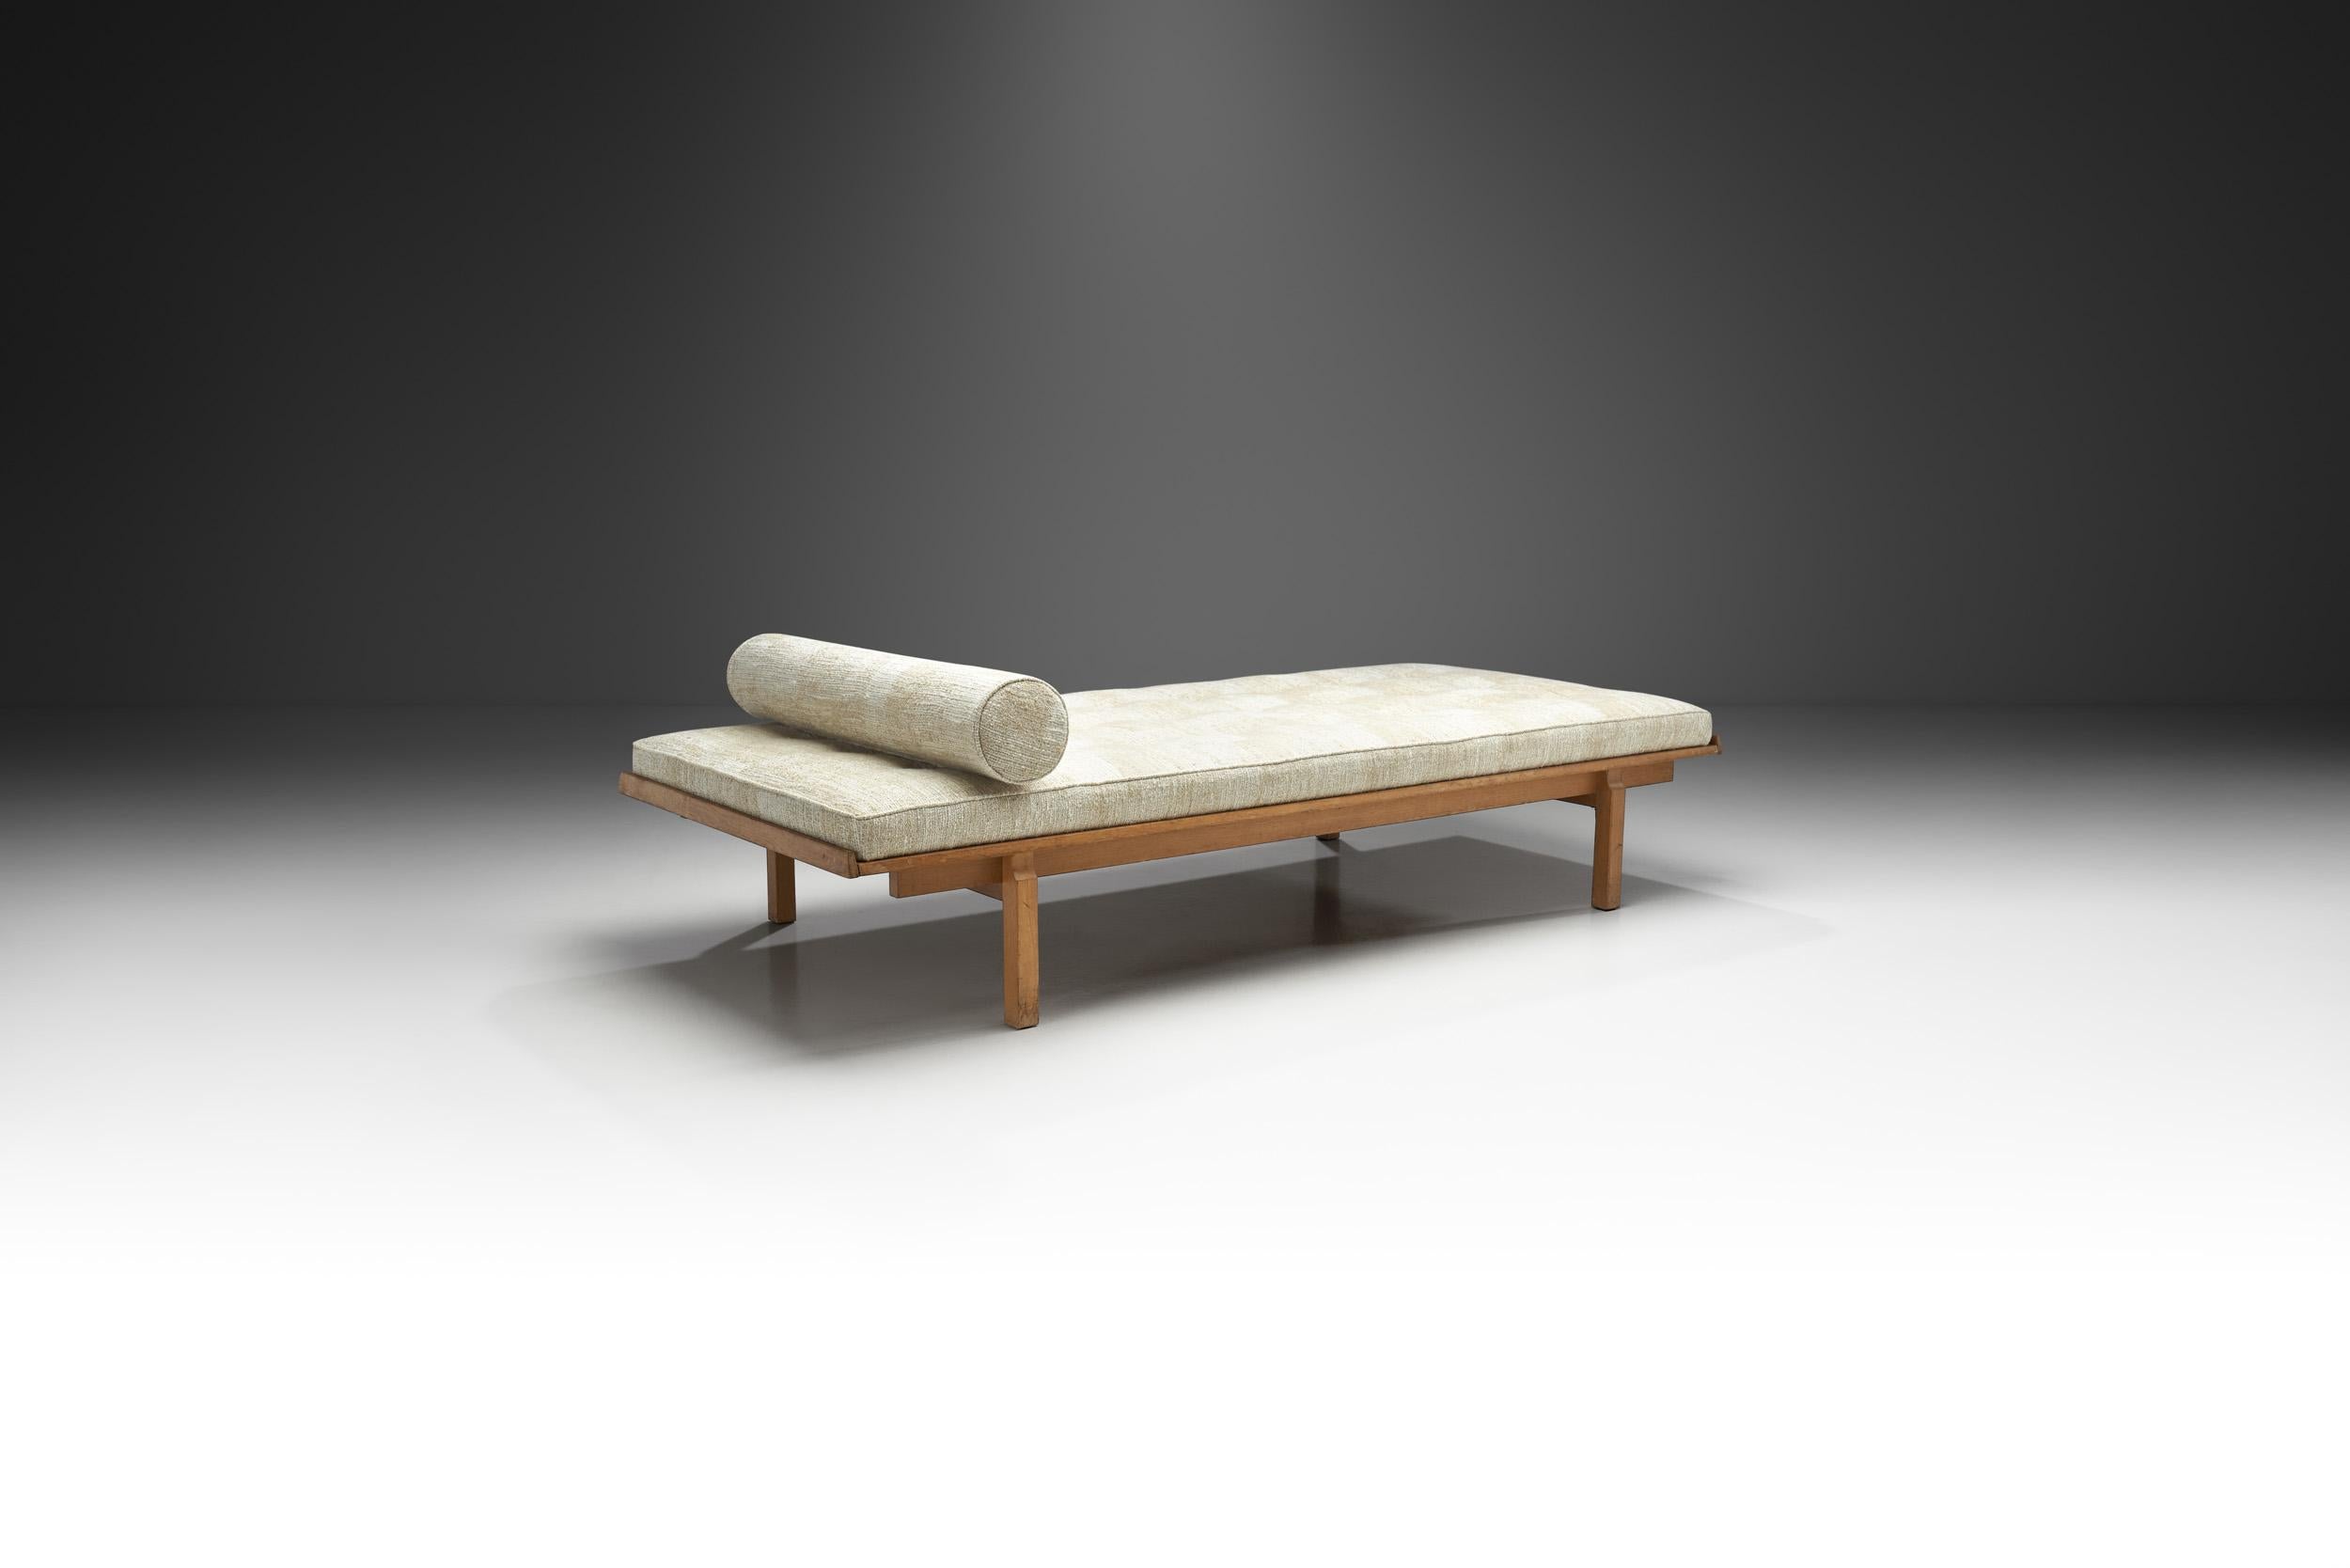 Mid-20th Century Danish Oak Daybed with Upholstered Mattress and Pillow, Denmark, ca 1950s For Sale